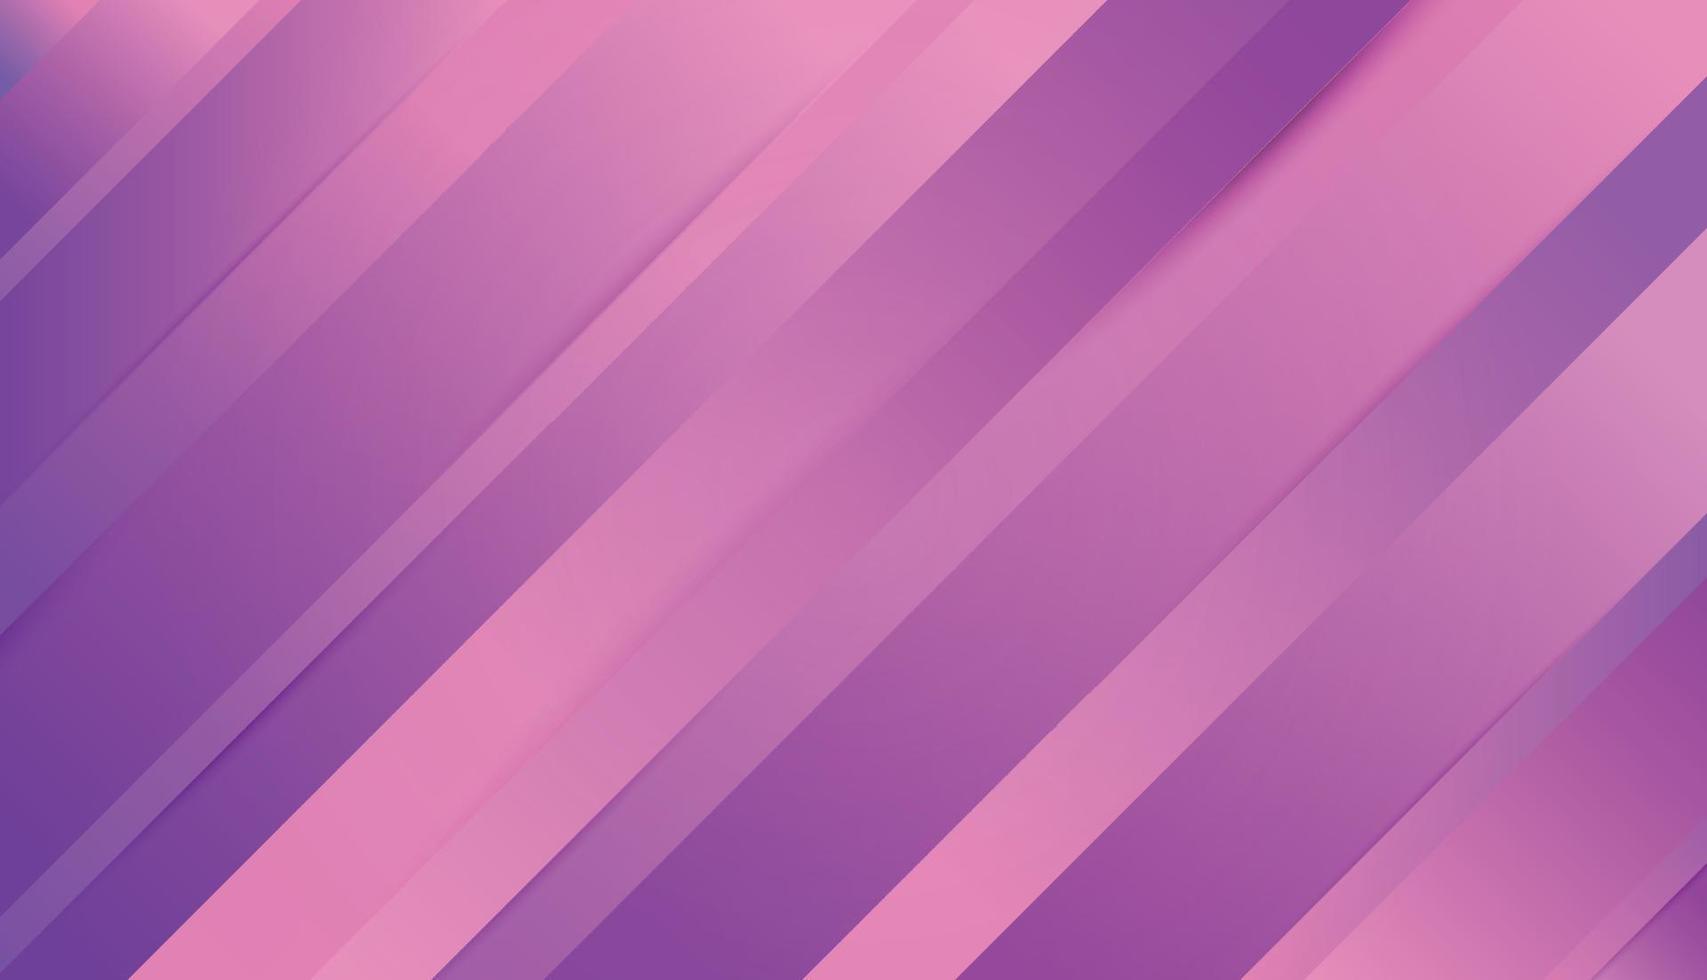 Modern Purple And Pink Gradient Abstract Colorful Stripes Background Wallpaper vector